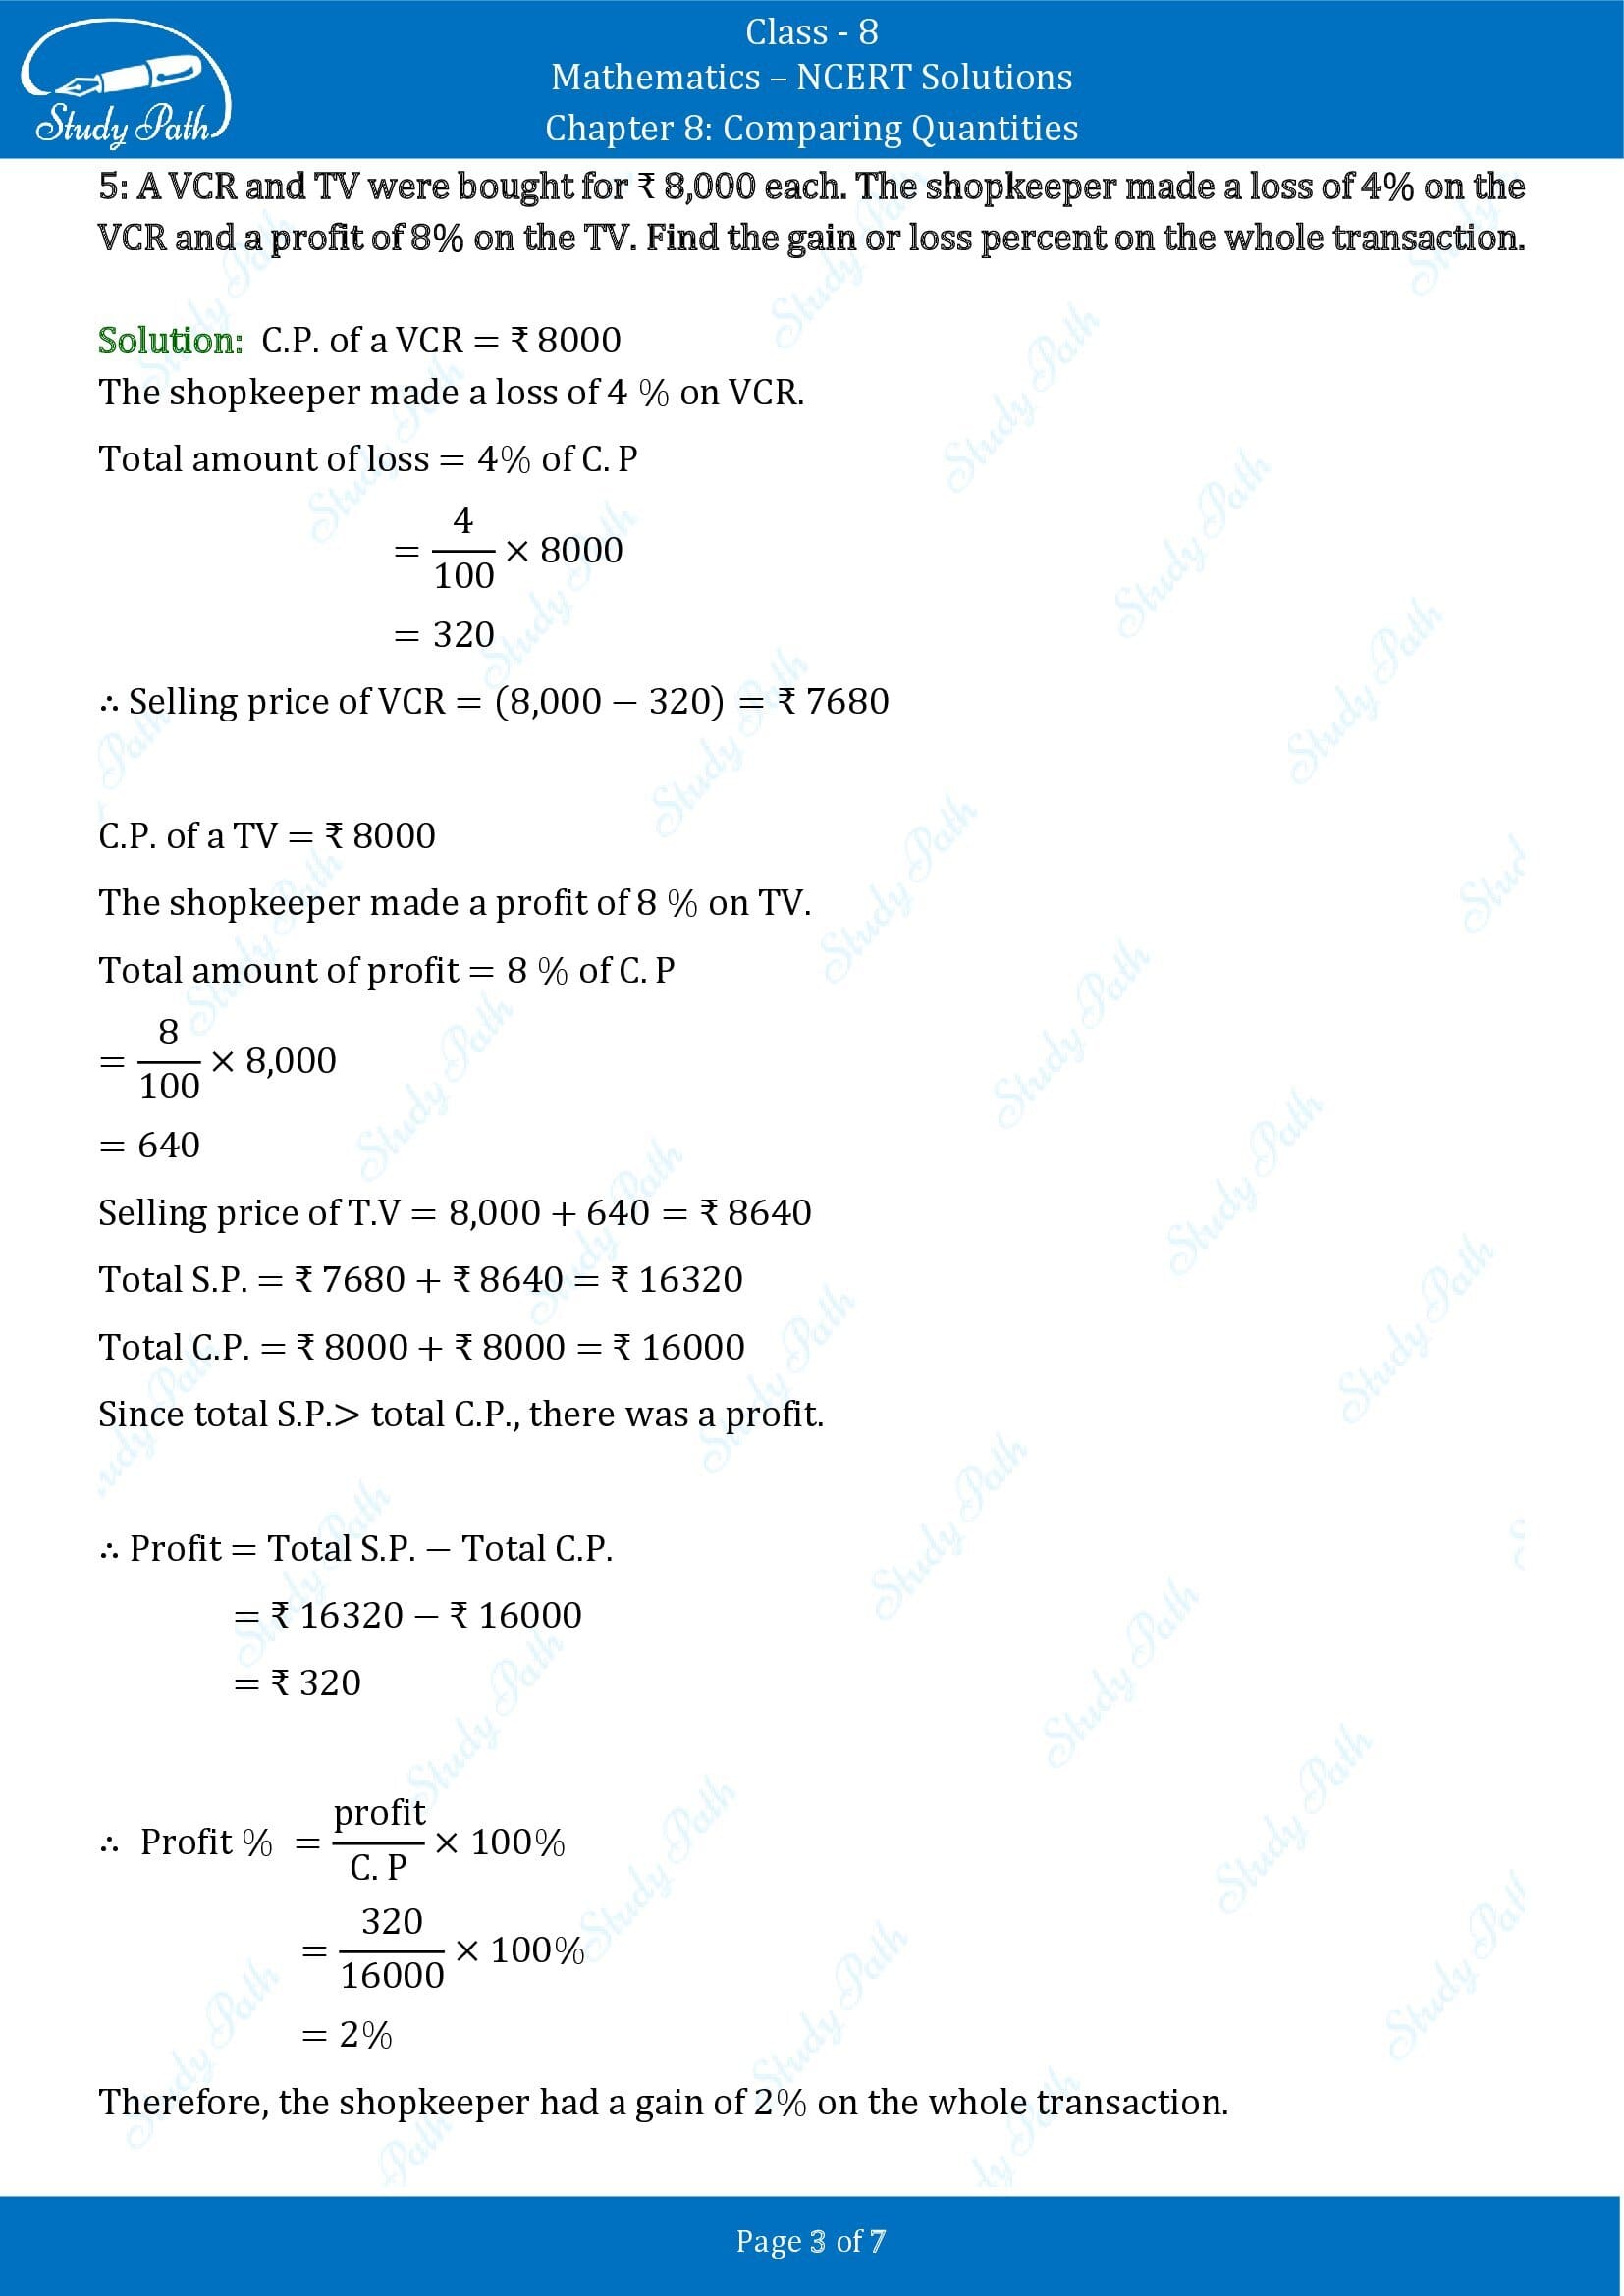 NCERT Solutions for Class 8 Maths Chapter 8 Comparing Quantities Exercise 8.2 00003